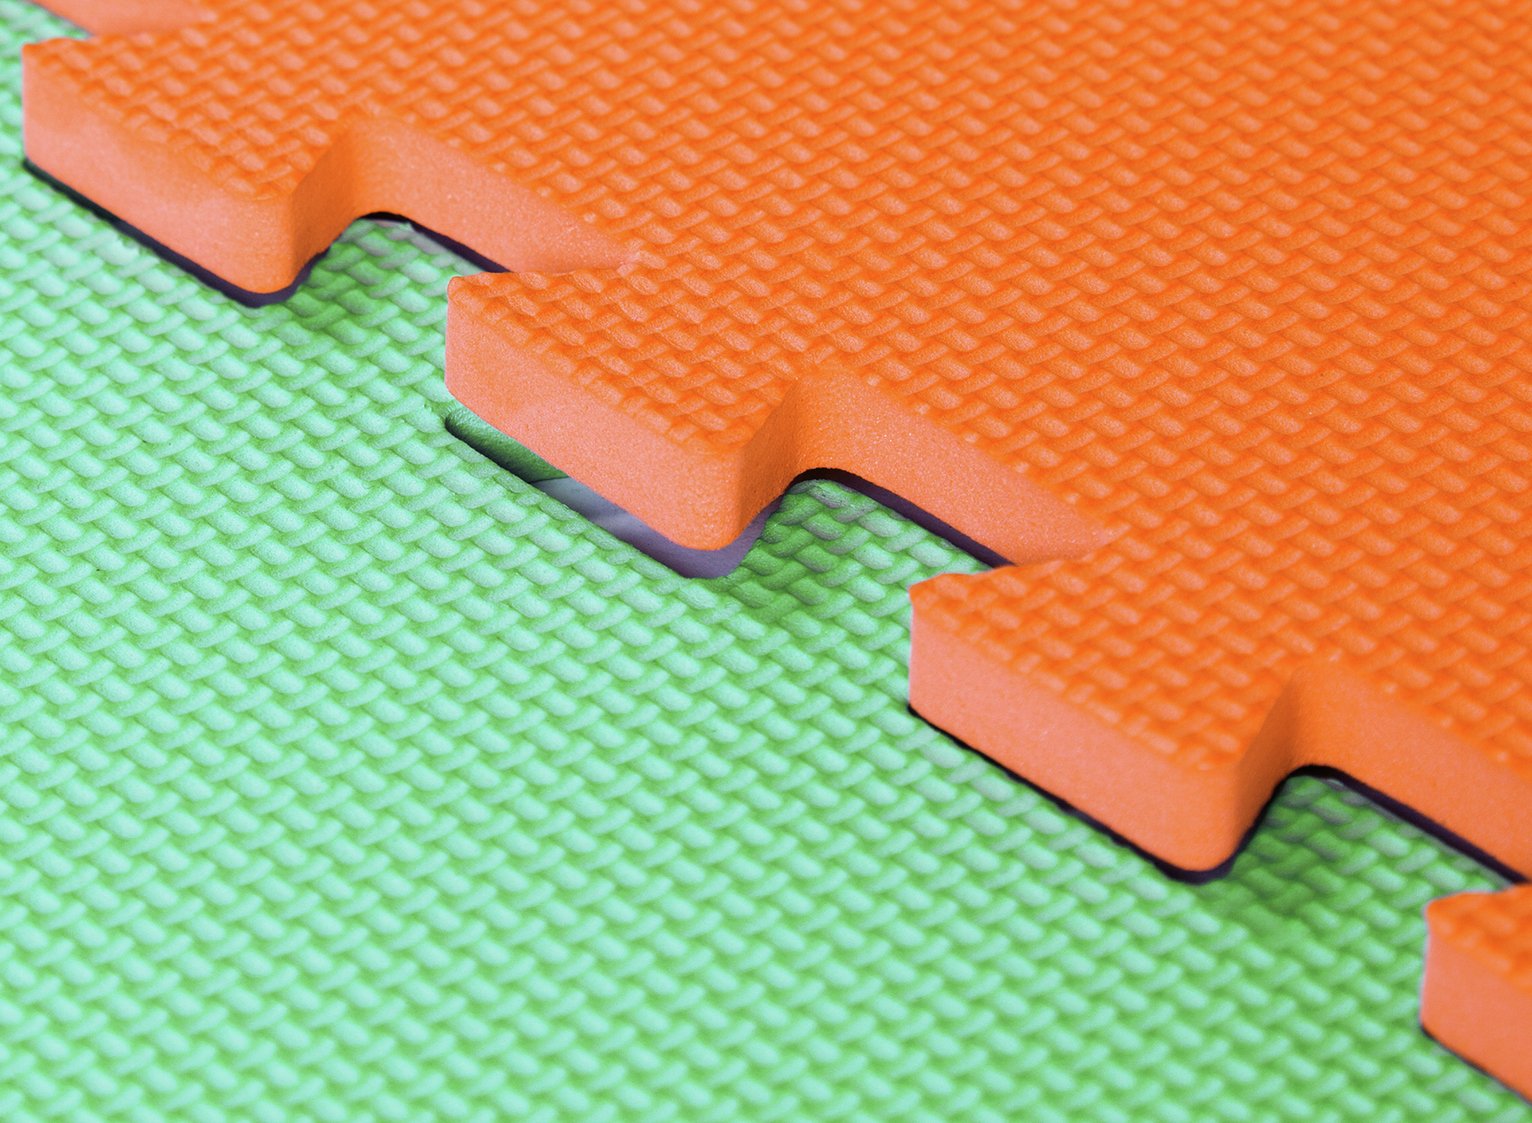 Chad Valley Foam Protector Tumbler Mats Review